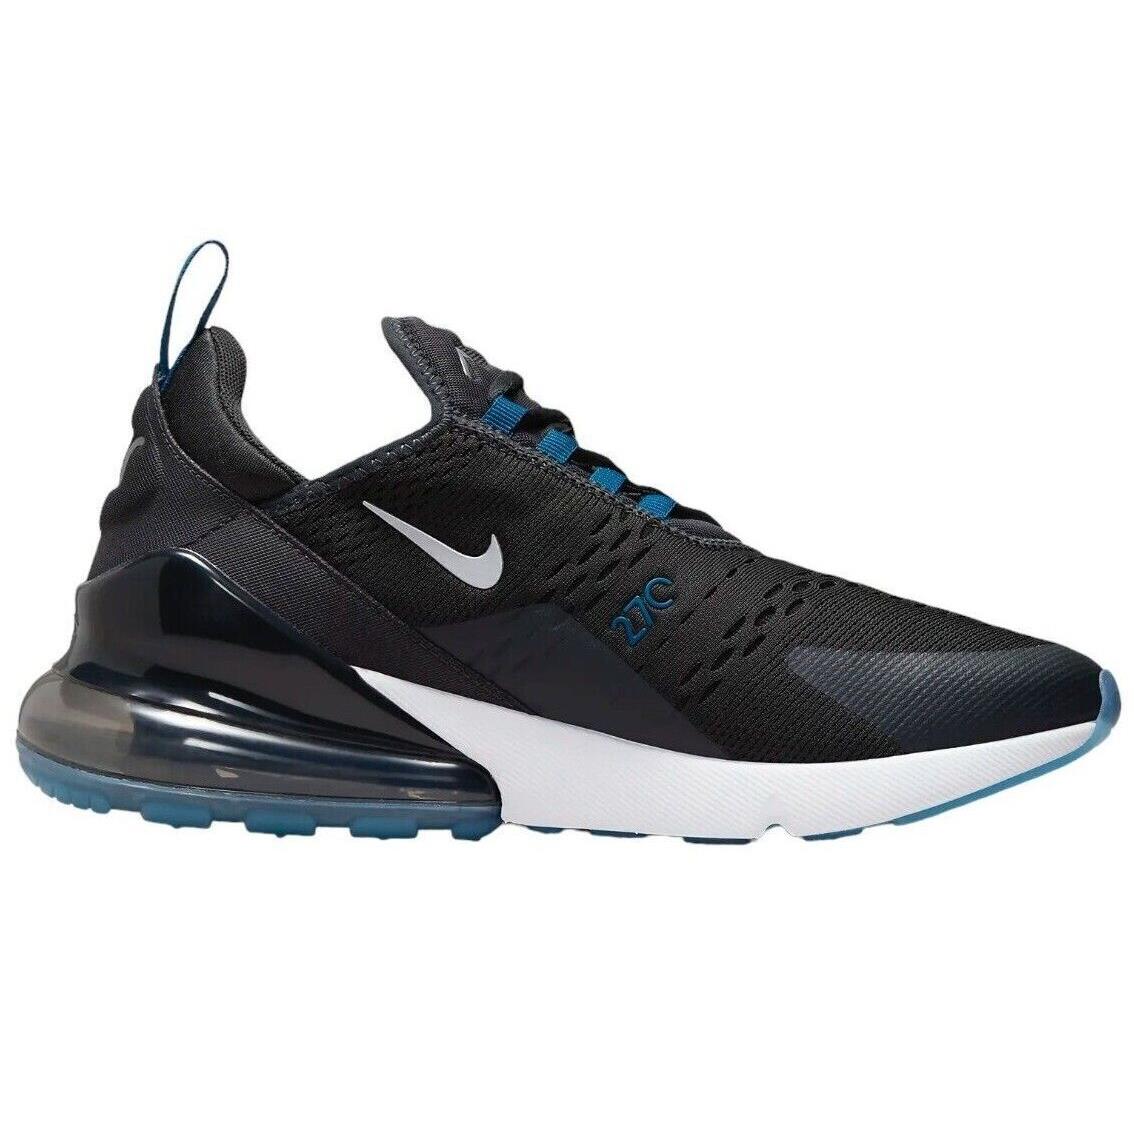 Nike Air Max 270 Men`s Casual Shoes All Colors US Sizes 7-14 Anthracite/Metallic Silver